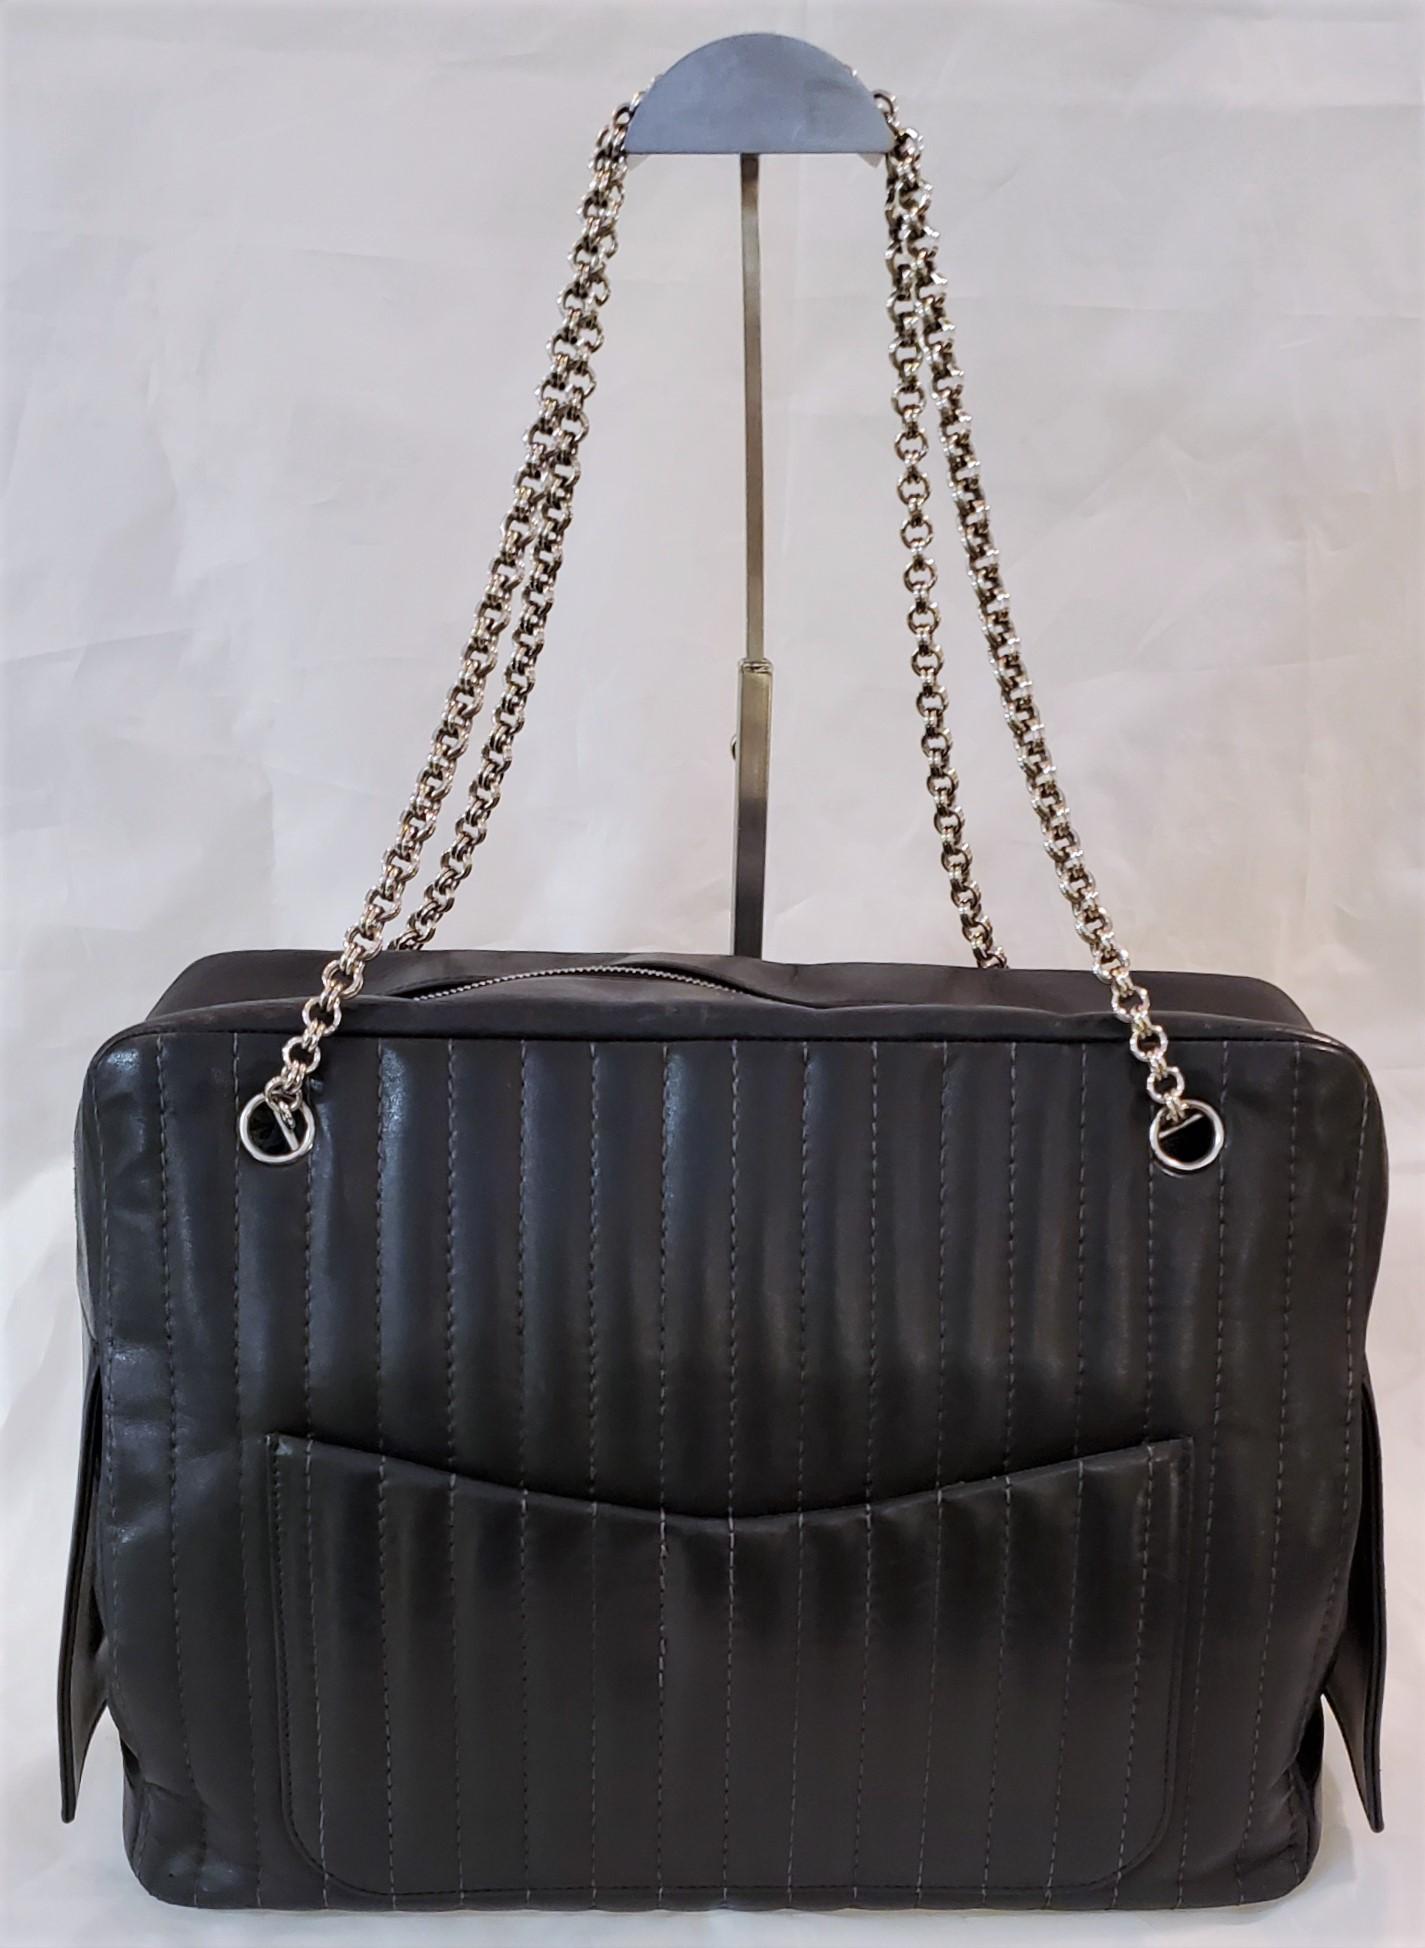 Auth Chanel Maxi Xl Leather Chained Hand Bag

Wonderful black leather look with silvered accents. The chain is a polished metal, the pull has a mall square CC accent at the tip for the scissors. The side of the bag has a lone flap that has a